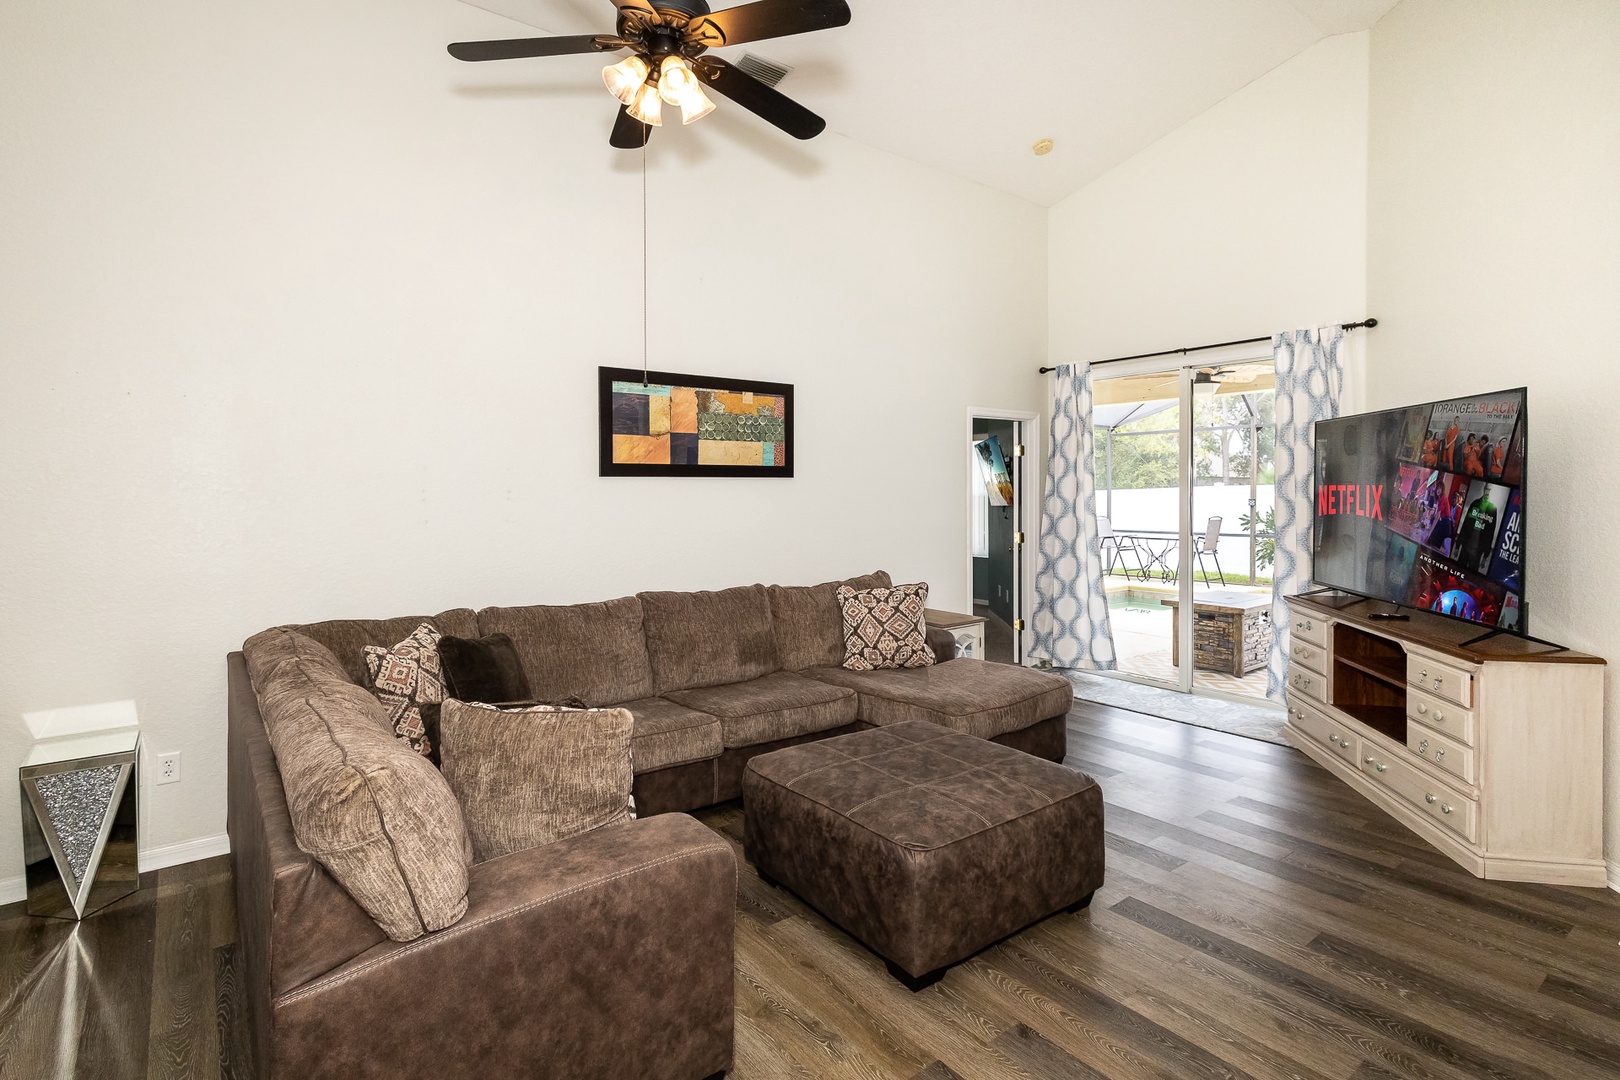 Comfortable seating in the living room for you and your guests